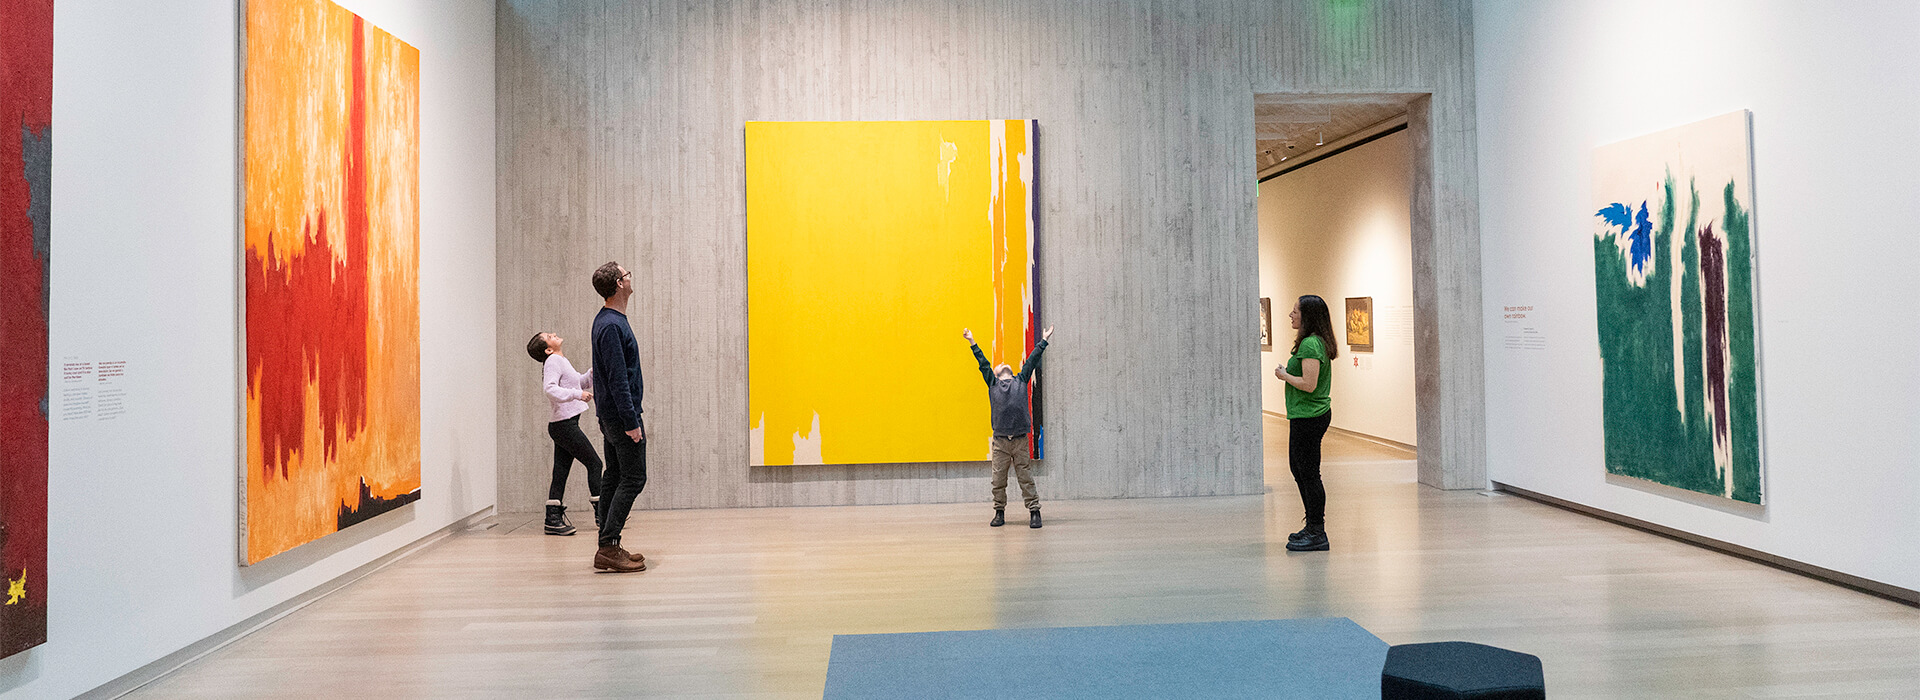 A family looks at colorful abstract art in a gallery while a young boy raises his arms up in the air